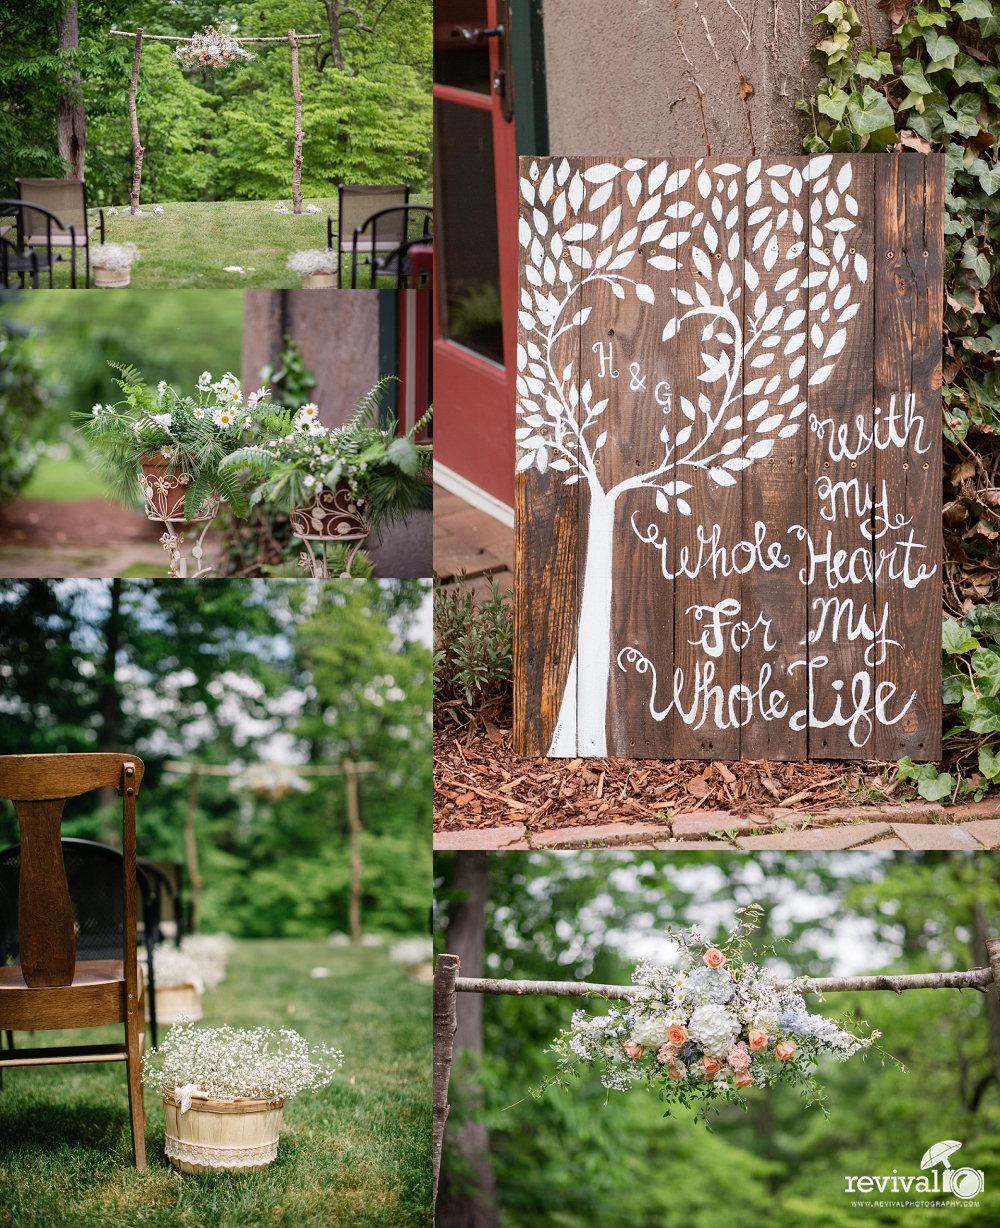 Heidi + Grant: A Vintage-Rustic Inspired Destination Wedding in the Blue Ridge Mountains of Asheville, NC www.revivalphotography.com